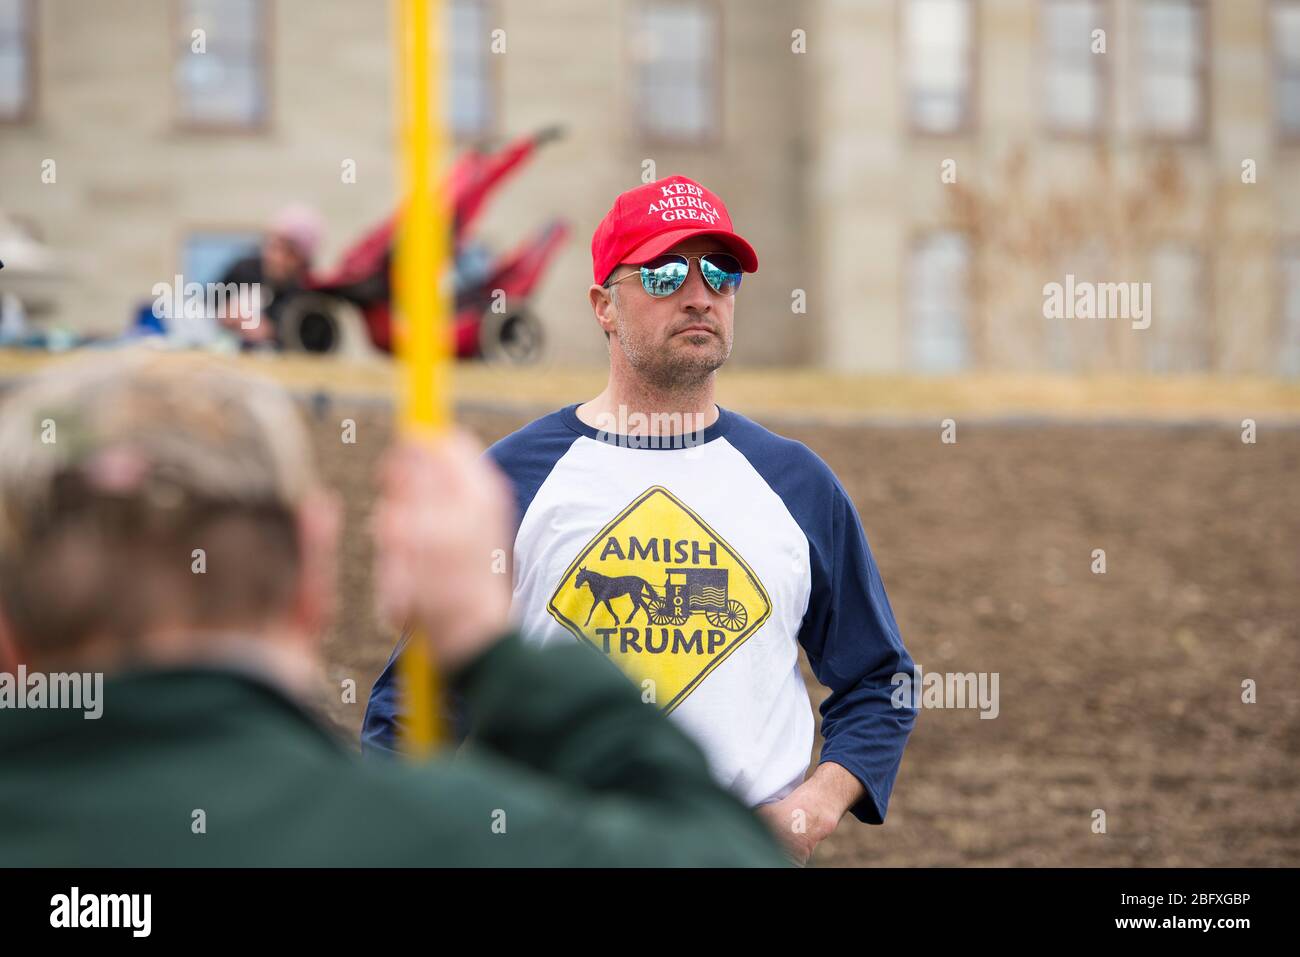 Helena, Montana - April 19, 2020: Man wearing a red Keep America Great hat at a protest over the government shutdown due to the Covid-19 Coronavirus p Stock Photo